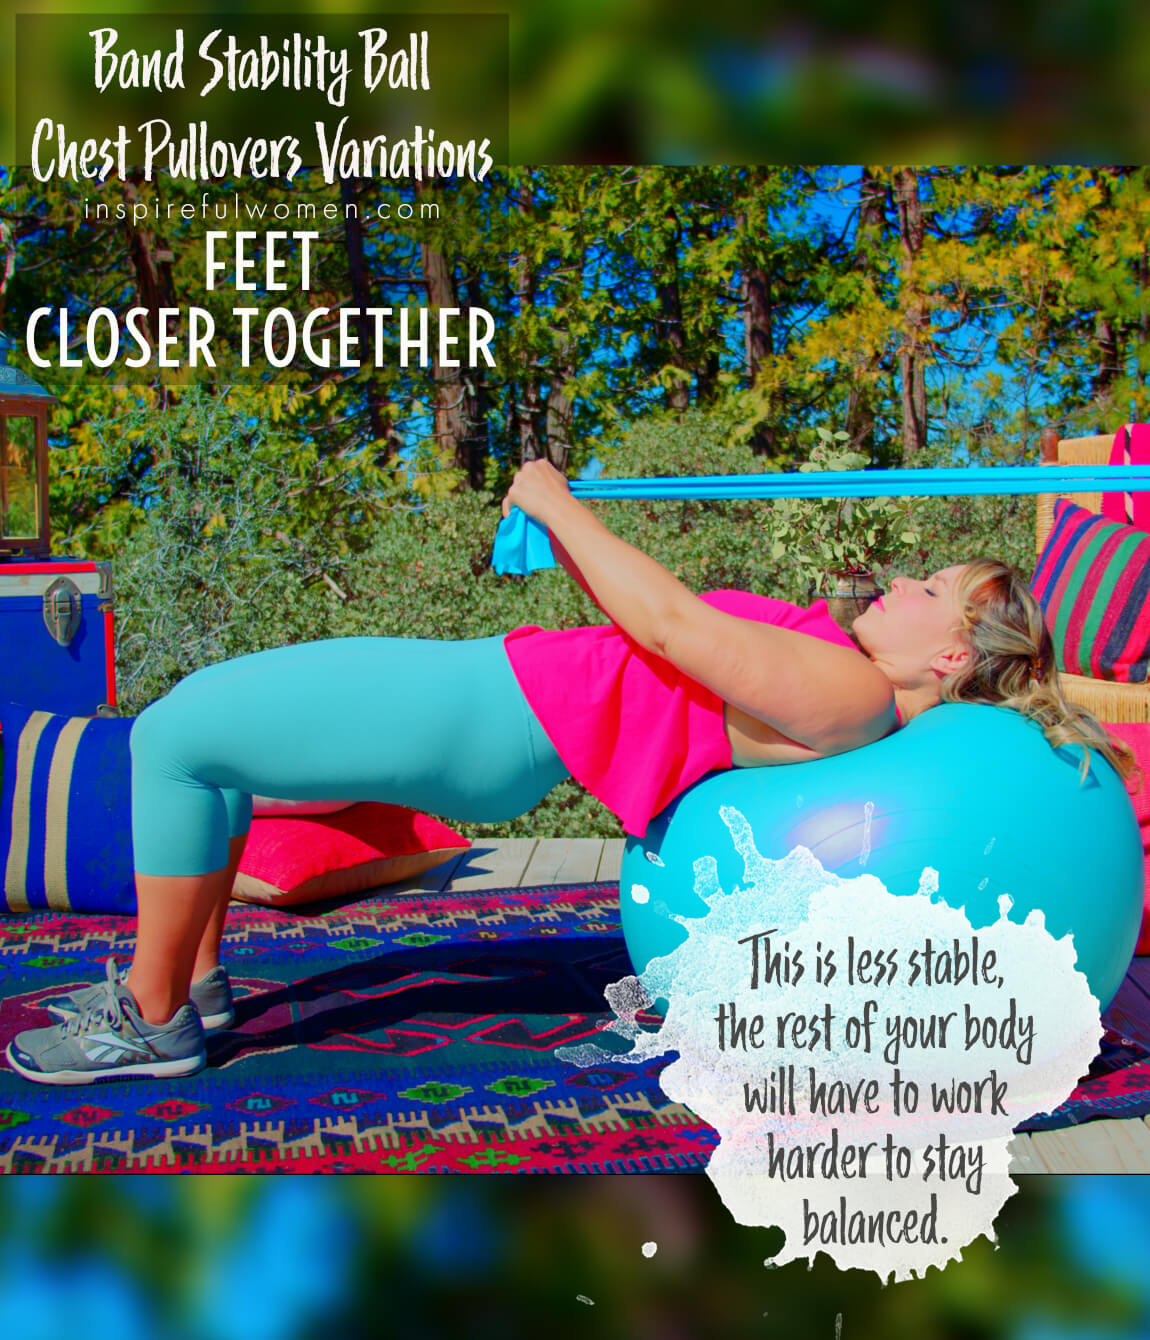 feet-closer-together-stability-ball-band-chest-pullover-variations